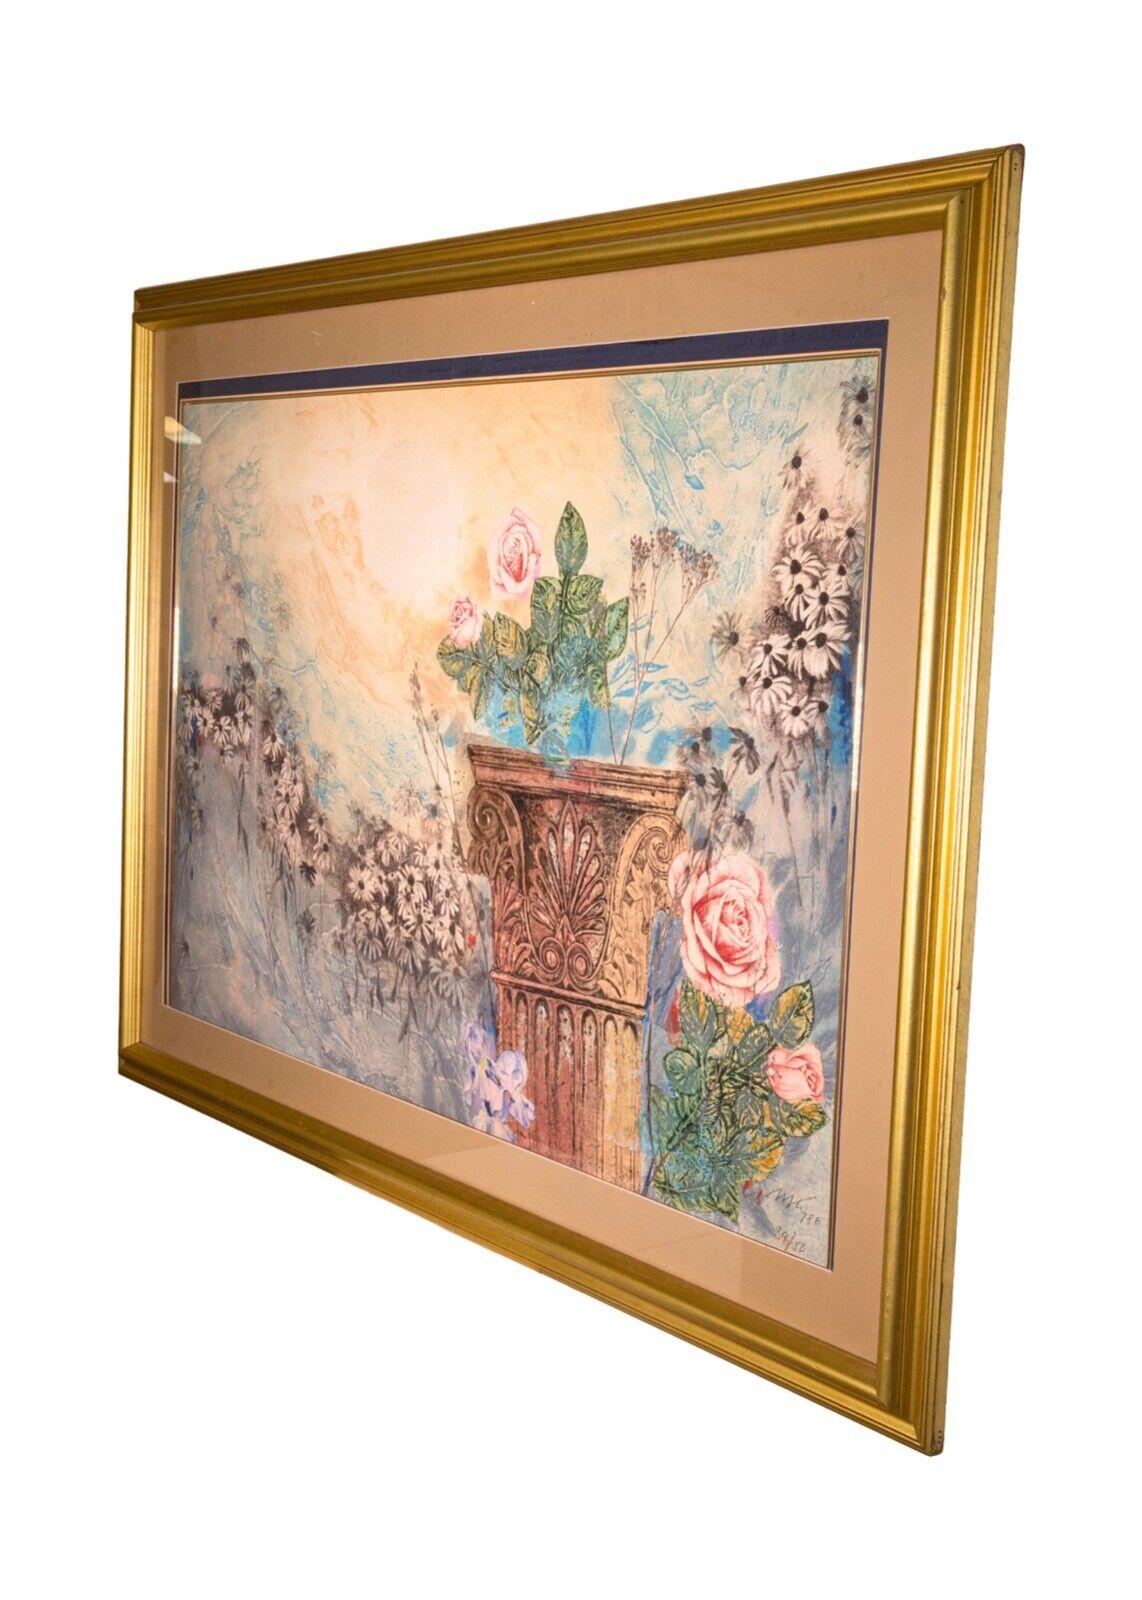 A lovely mixed media on paper titled “Inspirational Flowers” by Mikulas Kravjansky. Hand signed in pencil bottom right and annotated 39/50 with a 1986 date. A lush floral scene that flows within a radiant bright scenery. Krasvjansky is an